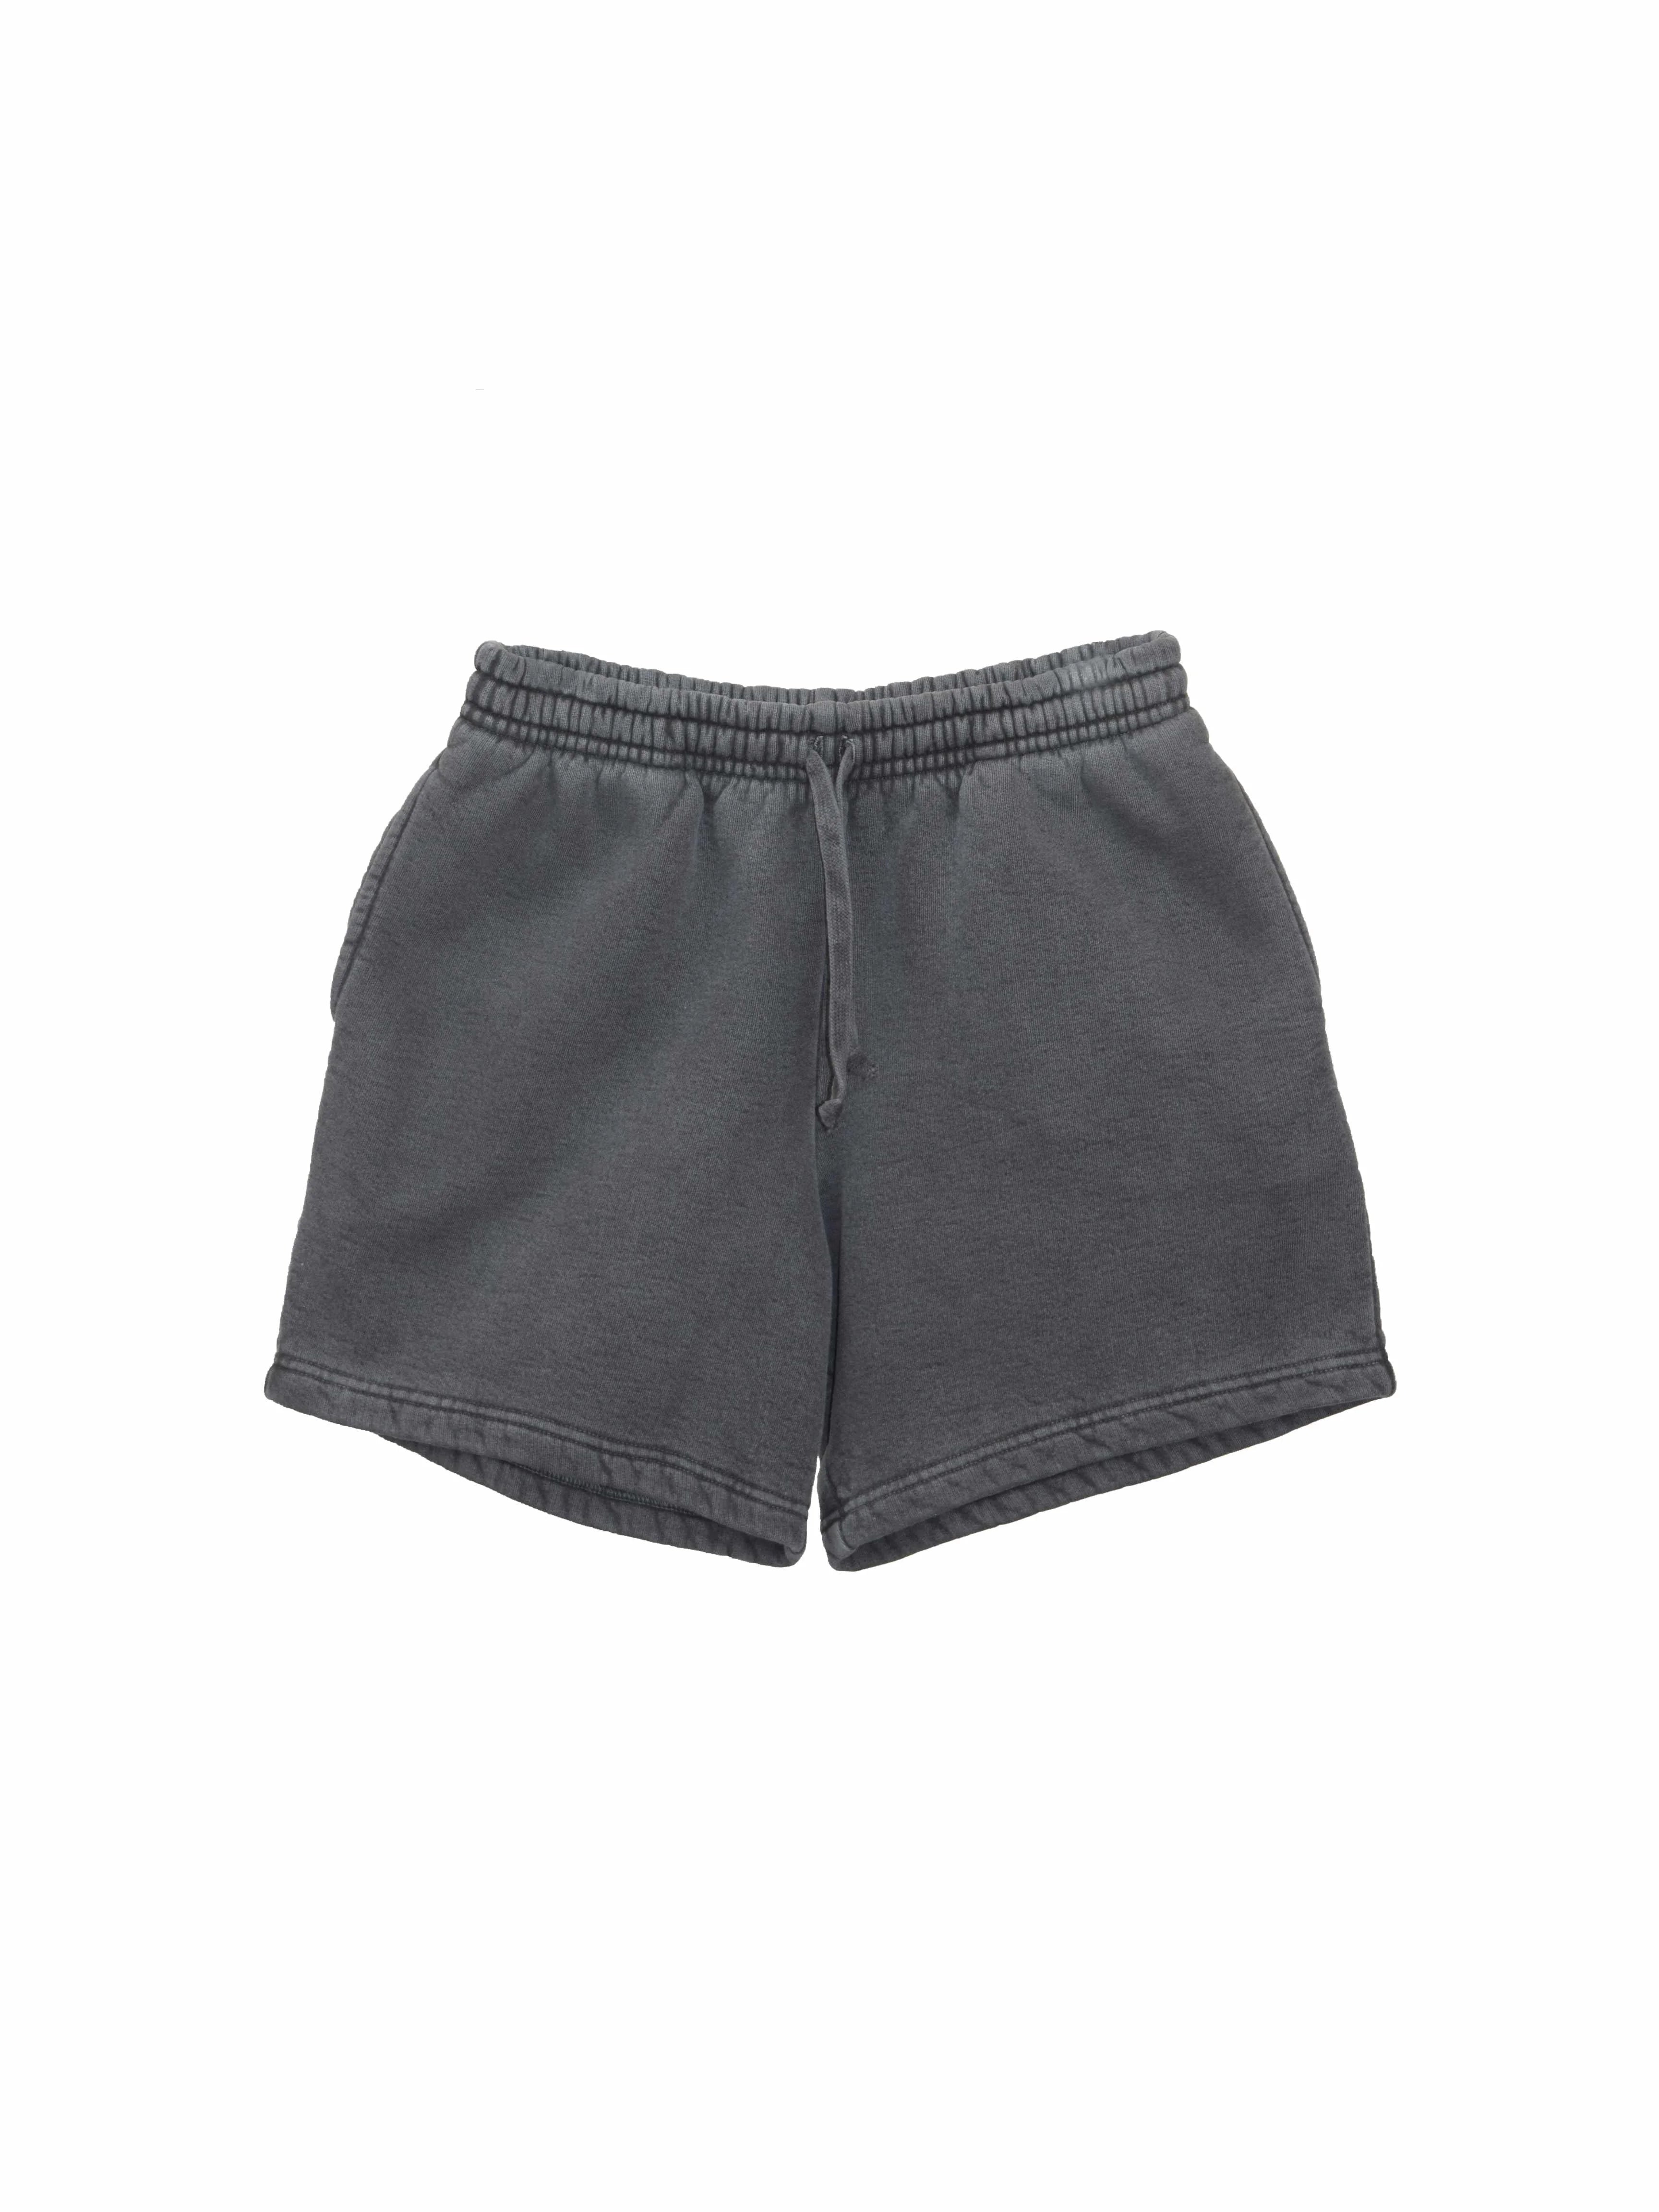 Park Long Shorts - Pebble Grey French Terry